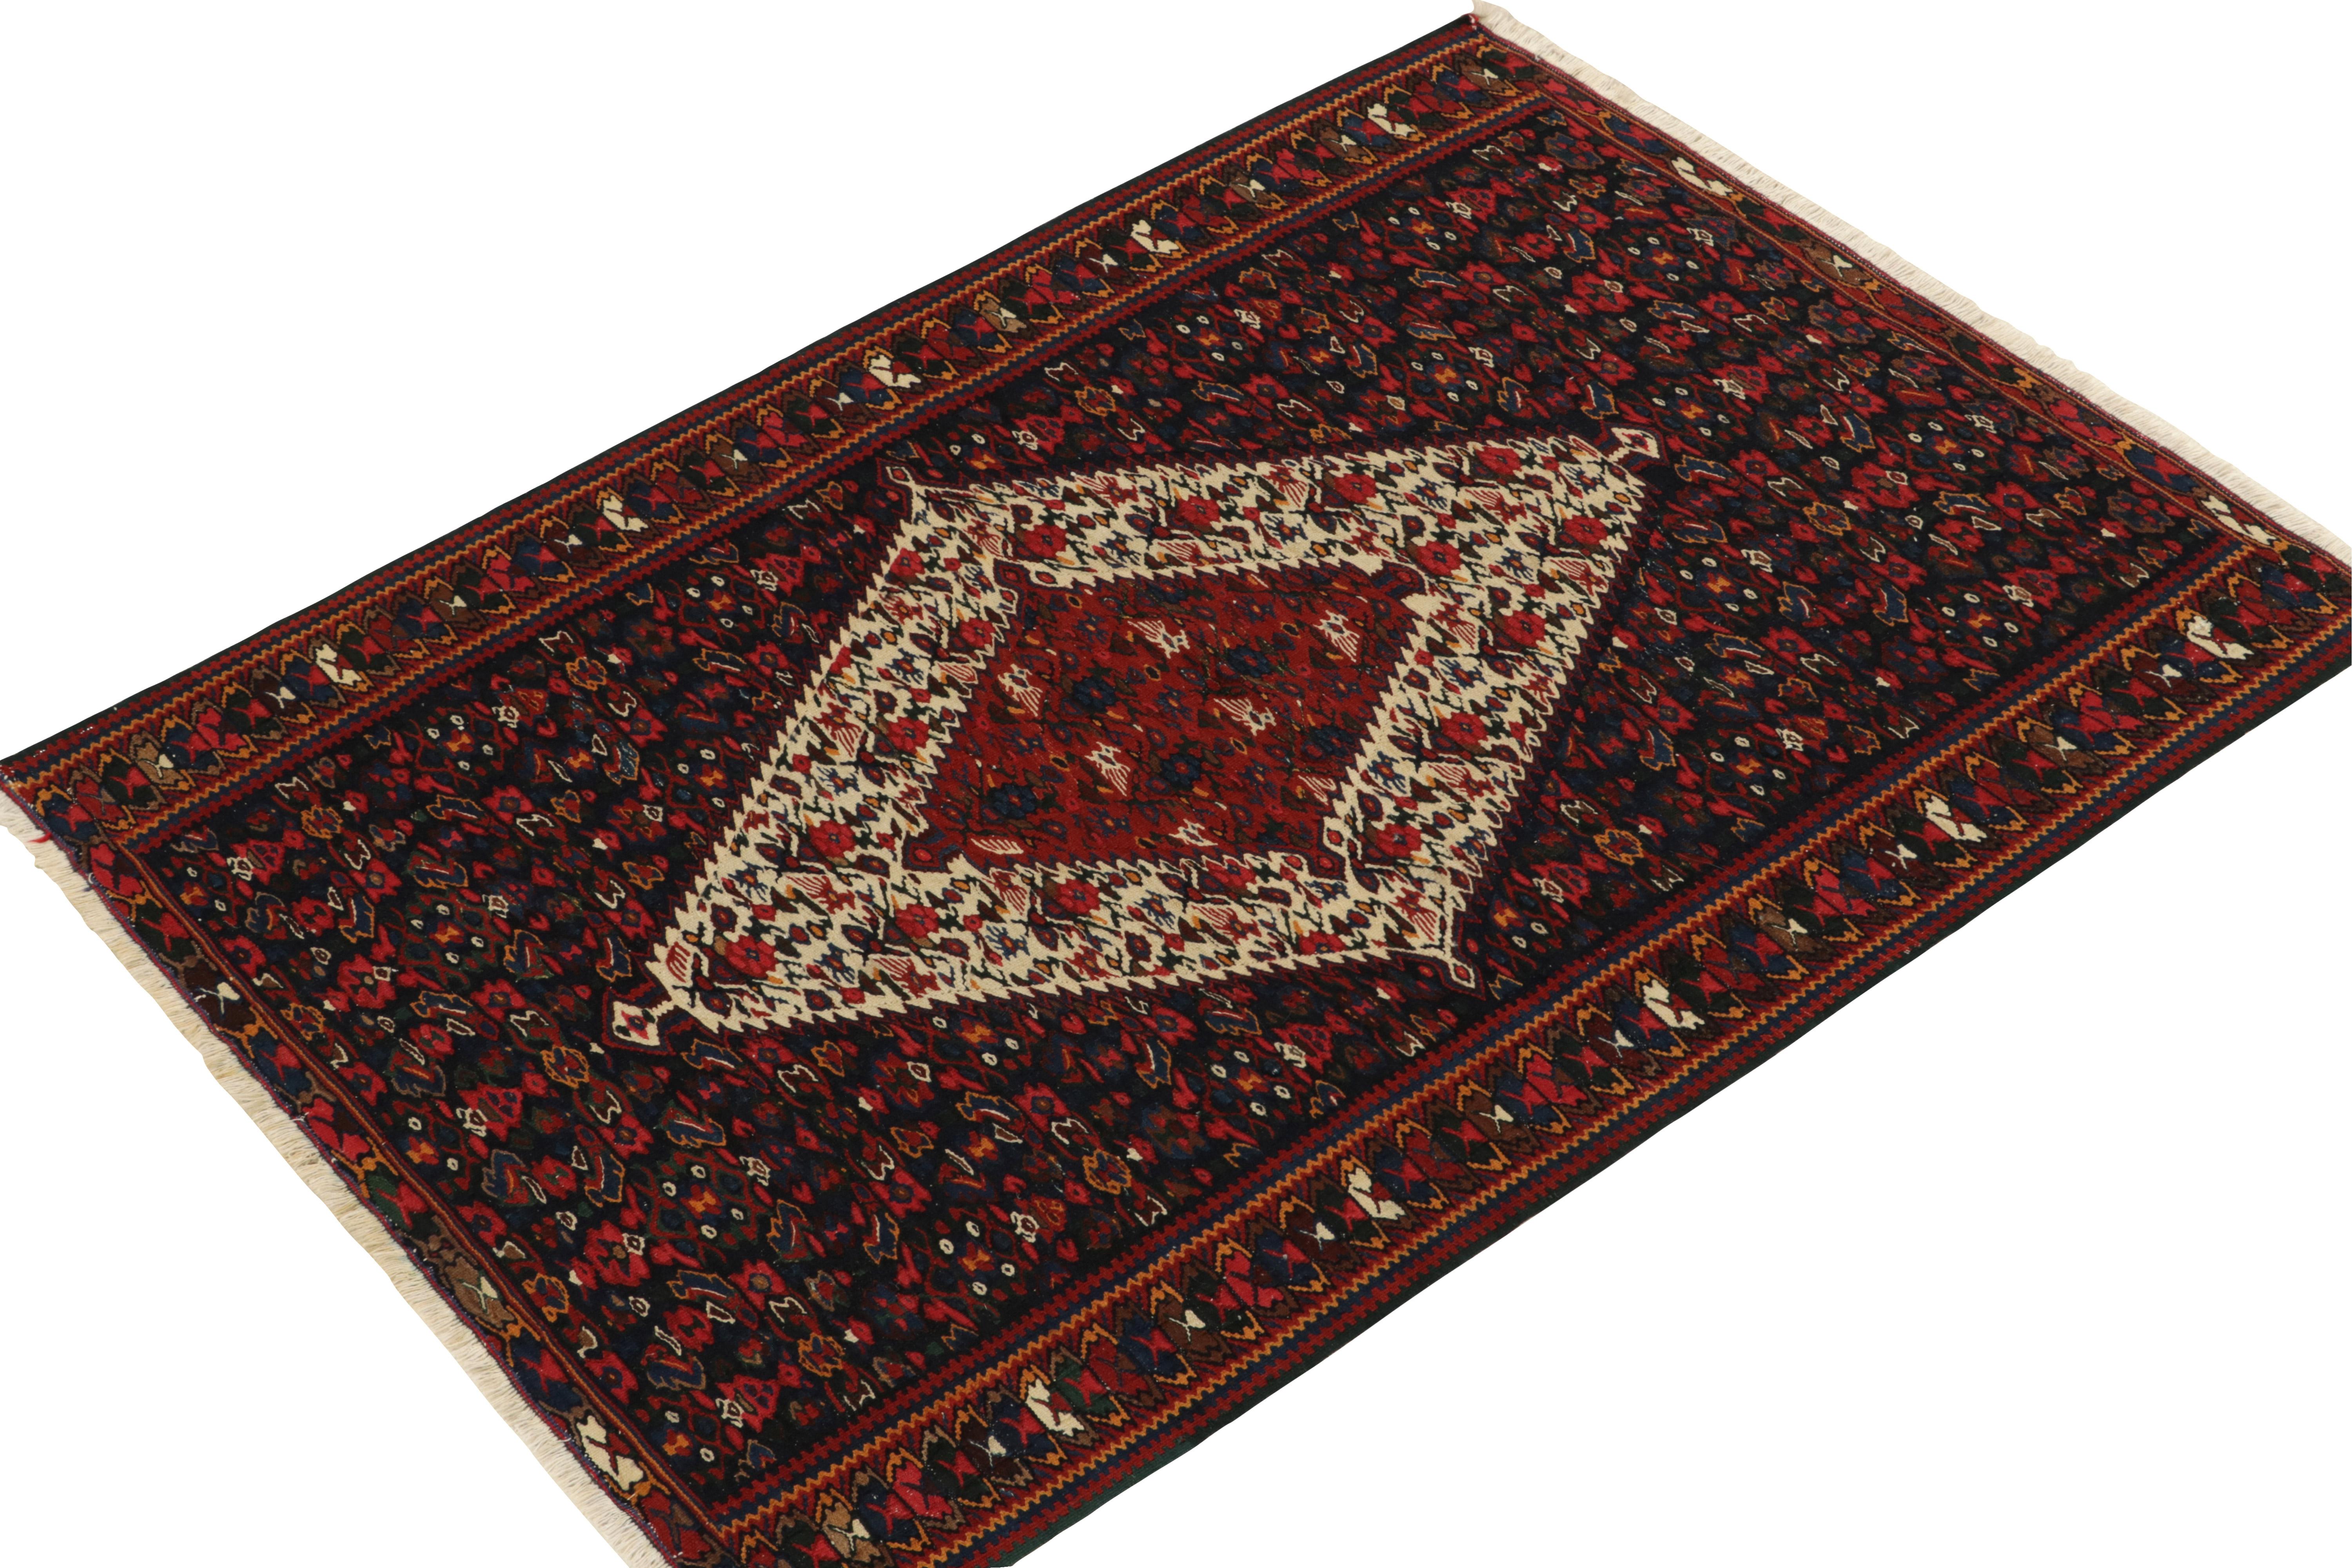 Hailing from Persia circa 1940s, a mid-century kilim rug newly unveiled Rug & Kilim’s vintage selections. The Senneh kilim rug connotes a union of  medallion and all-over field patterns with a rich array of burgundy red, deep blue and prevailing